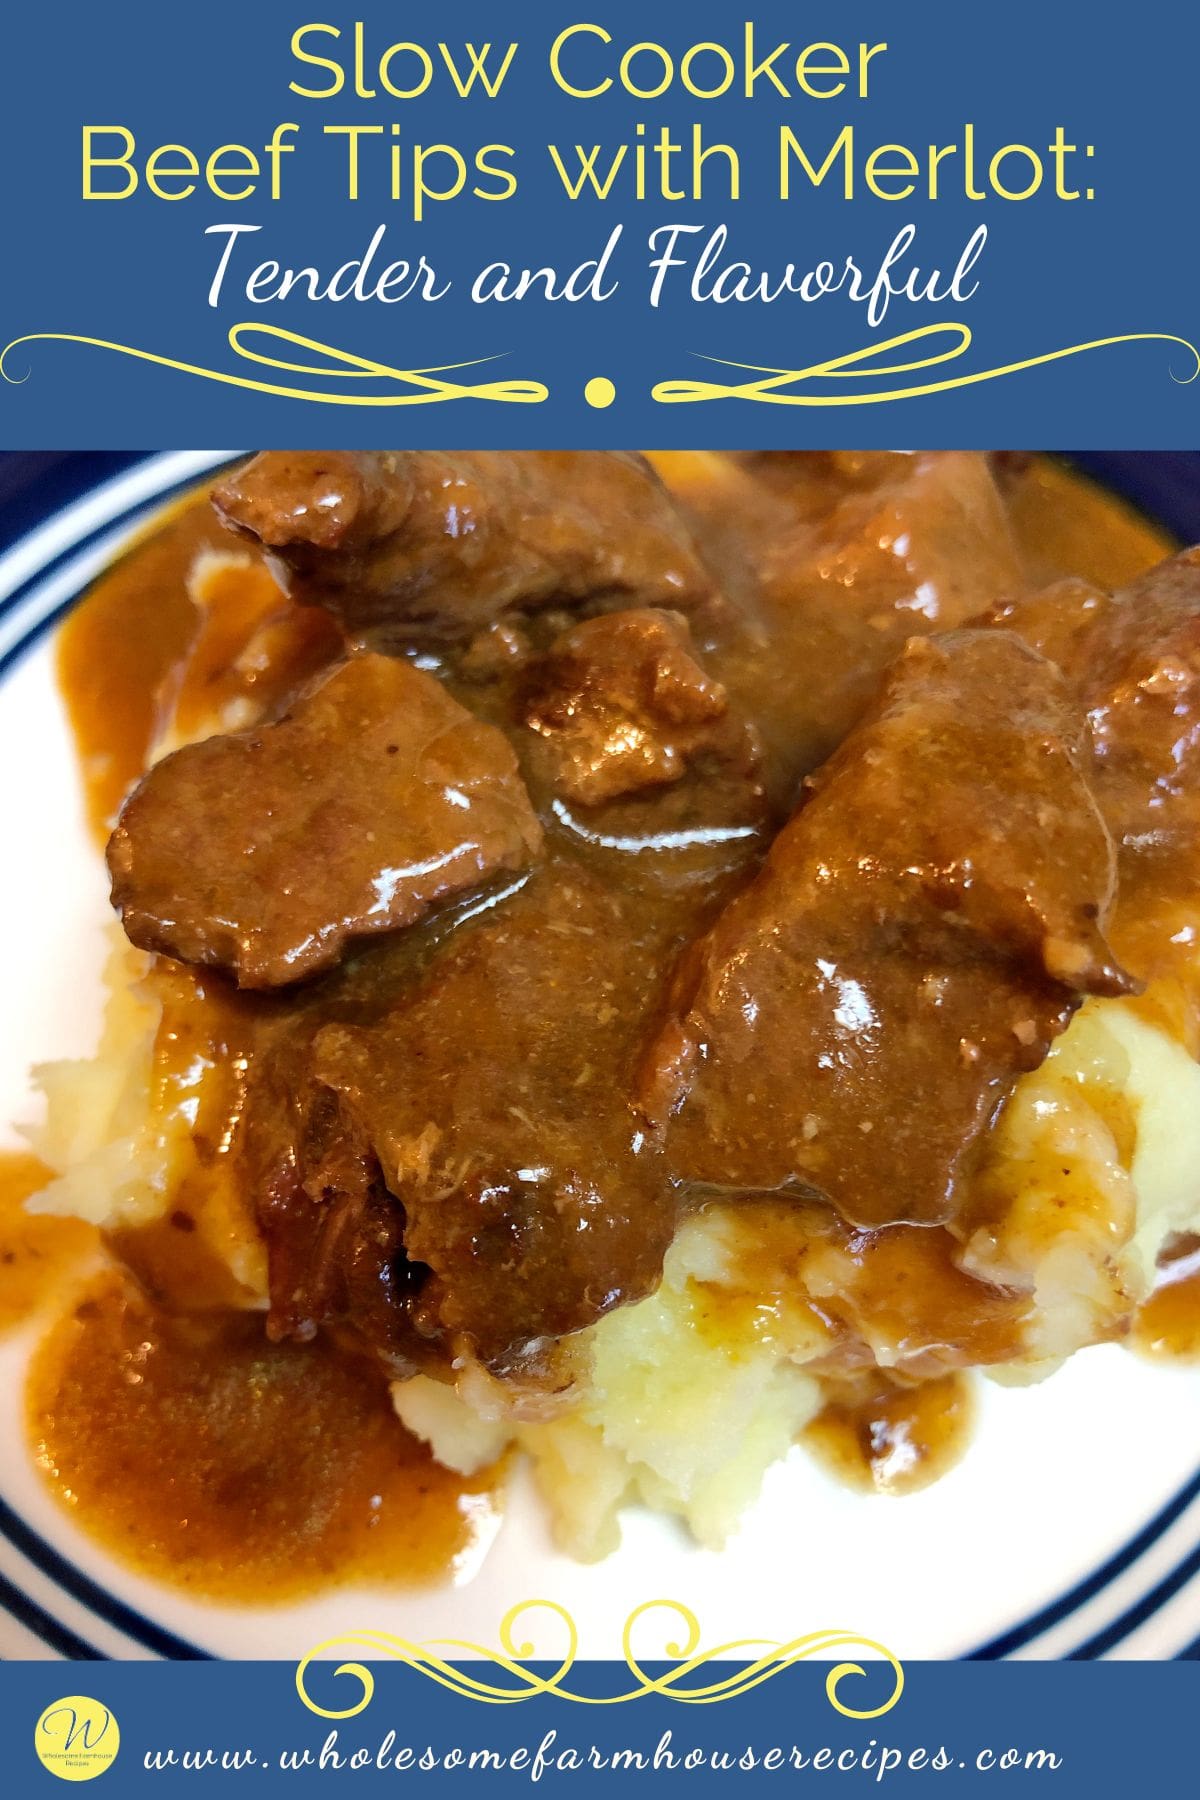 Slow Cooker Beef Tips with Merlot Tender and Flavorful